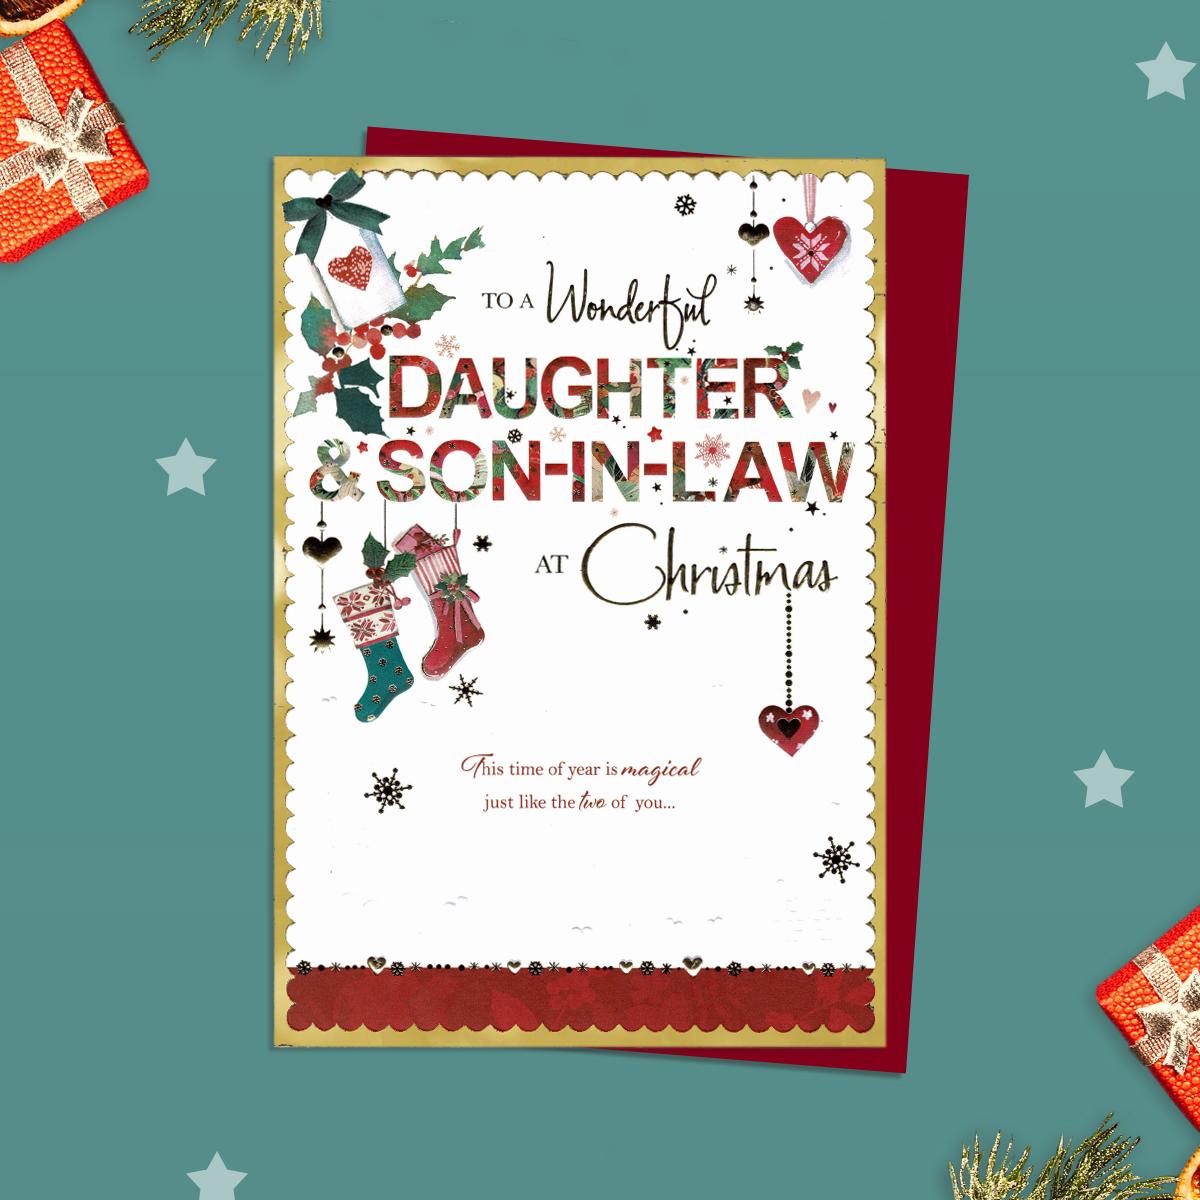 Daughter And Son In Law Christmas Card Alongside Its Red Envelope